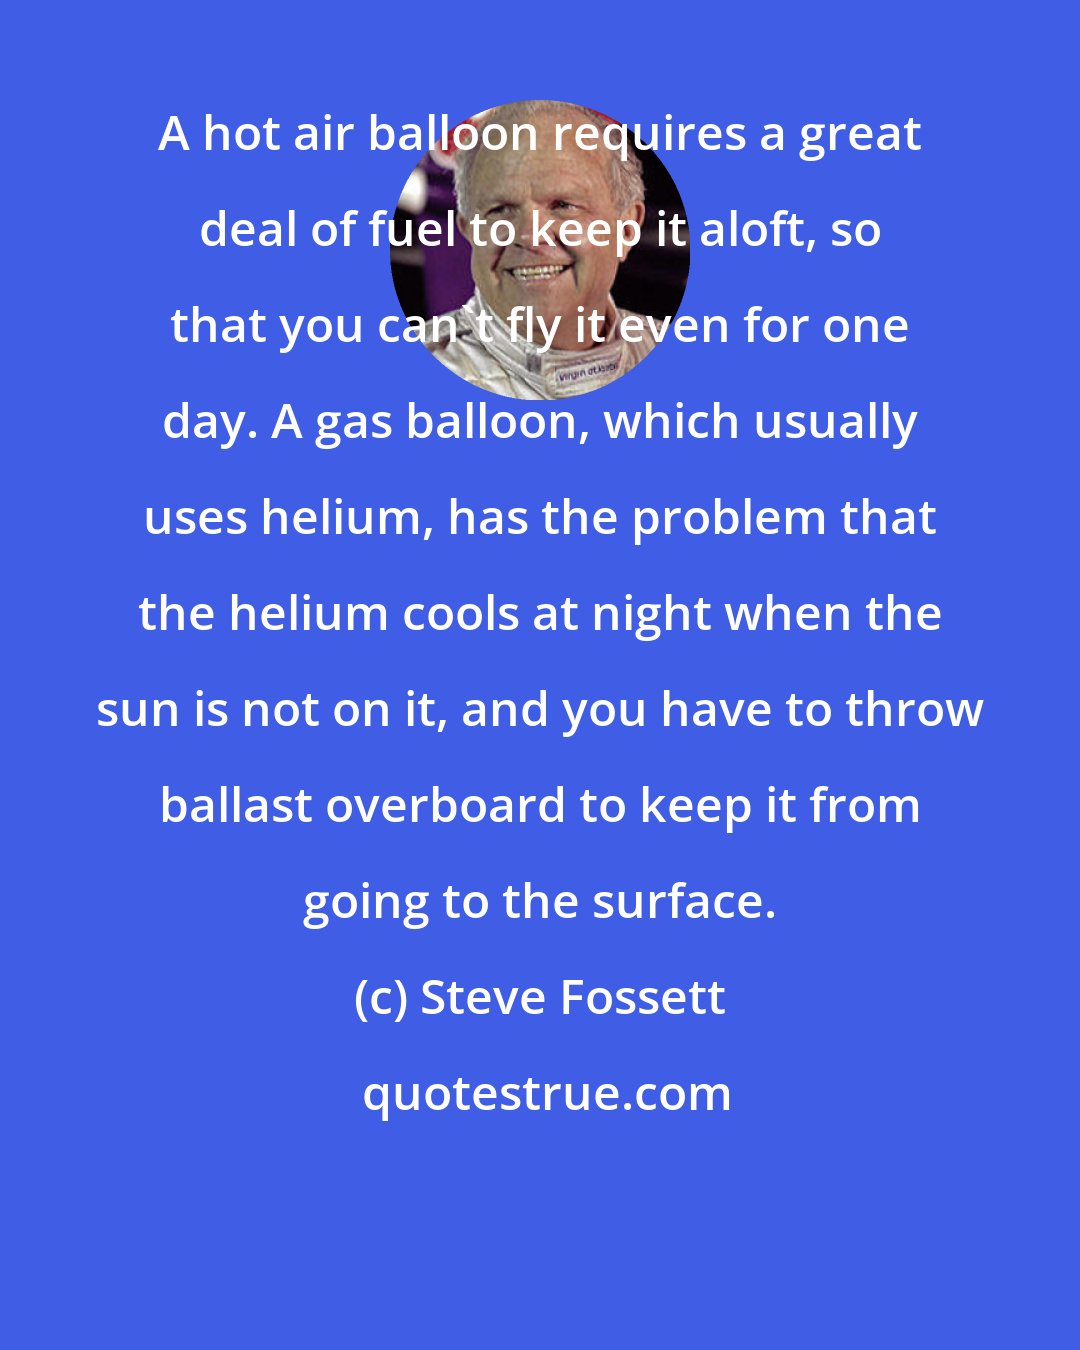 Steve Fossett: A hot air balloon requires a great deal of fuel to keep it aloft, so that you can't fly it even for one day. A gas balloon, which usually uses helium, has the problem that the helium cools at night when the sun is not on it, and you have to throw ballast overboard to keep it from going to the surface.